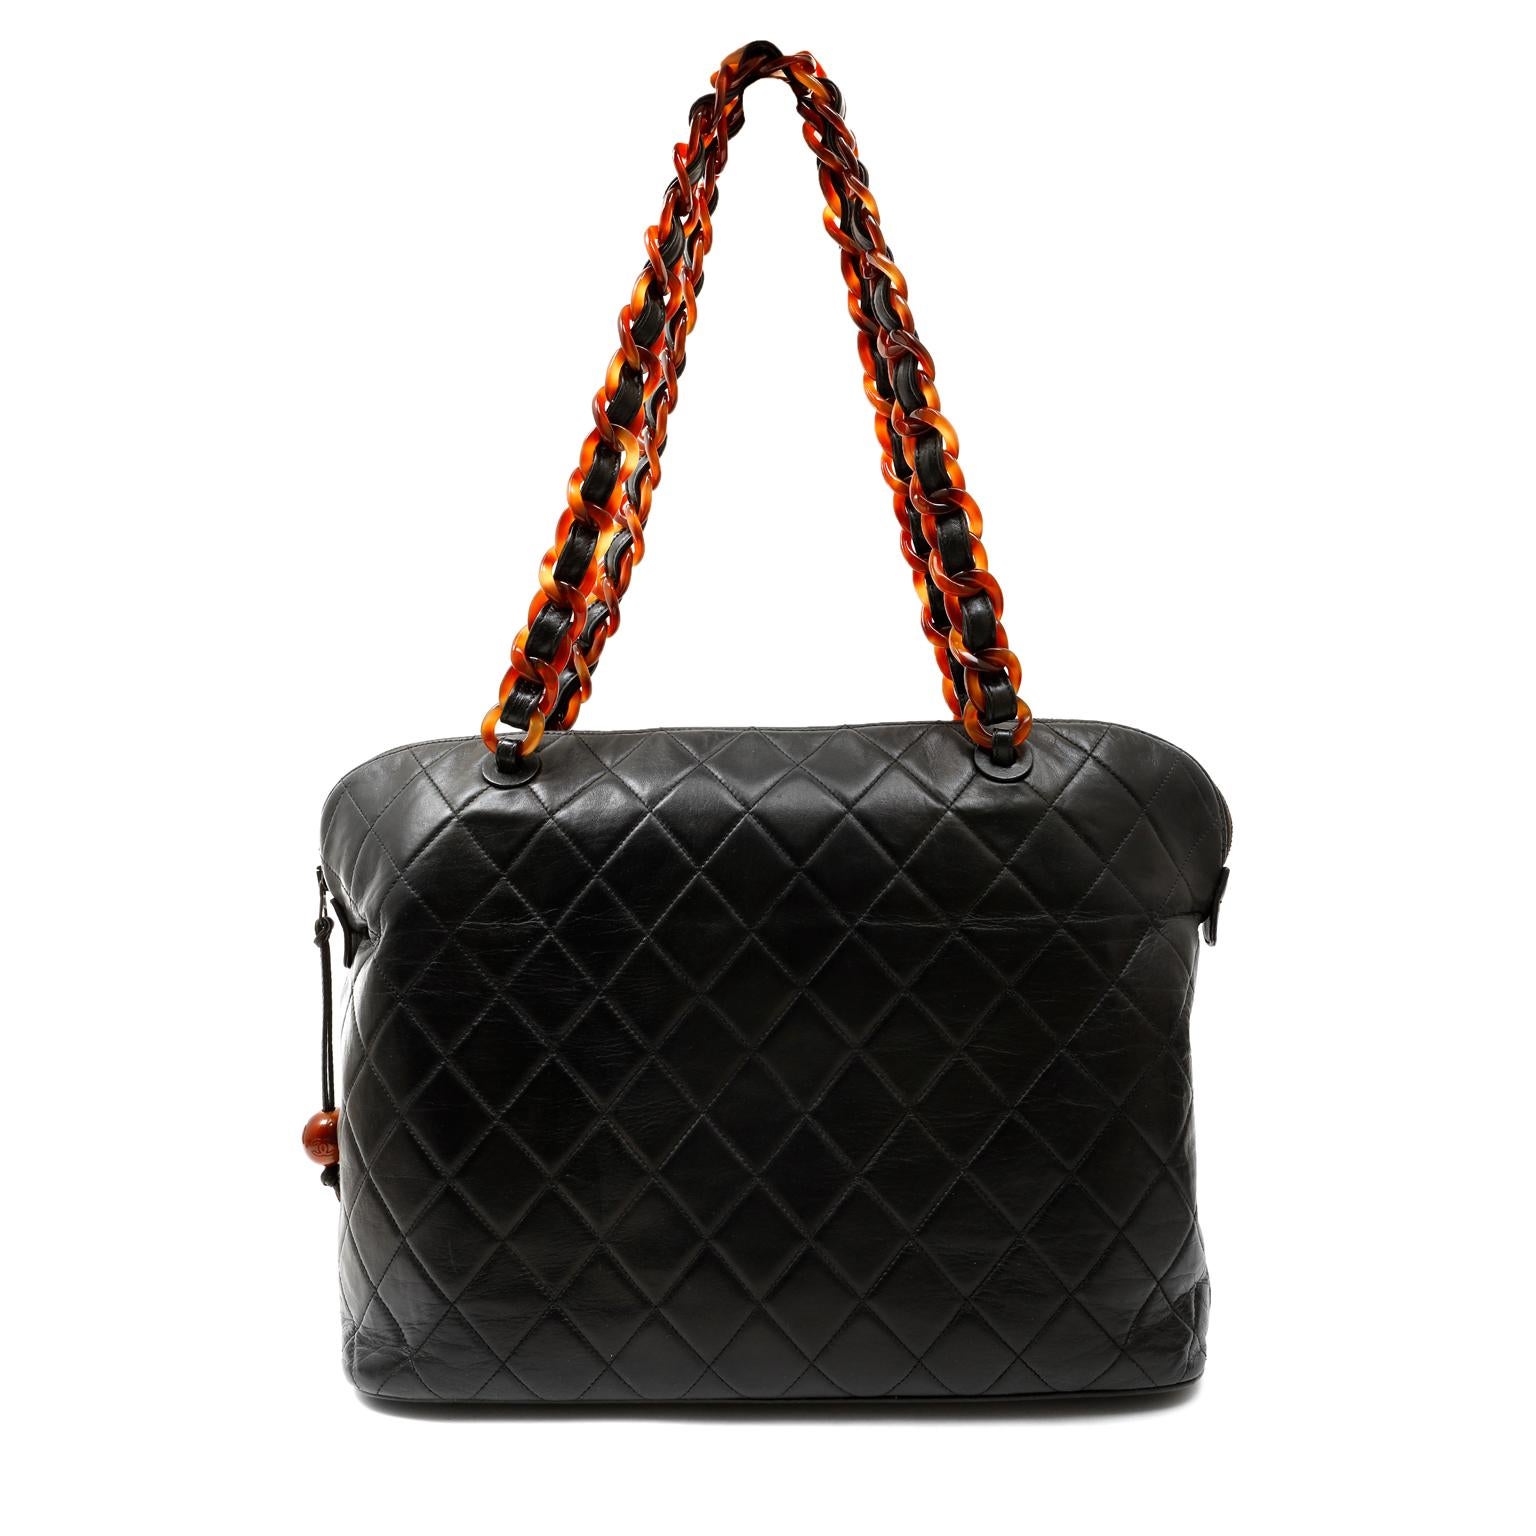 Chanel Vintage Black Leather Tortoise Chain Tote 2